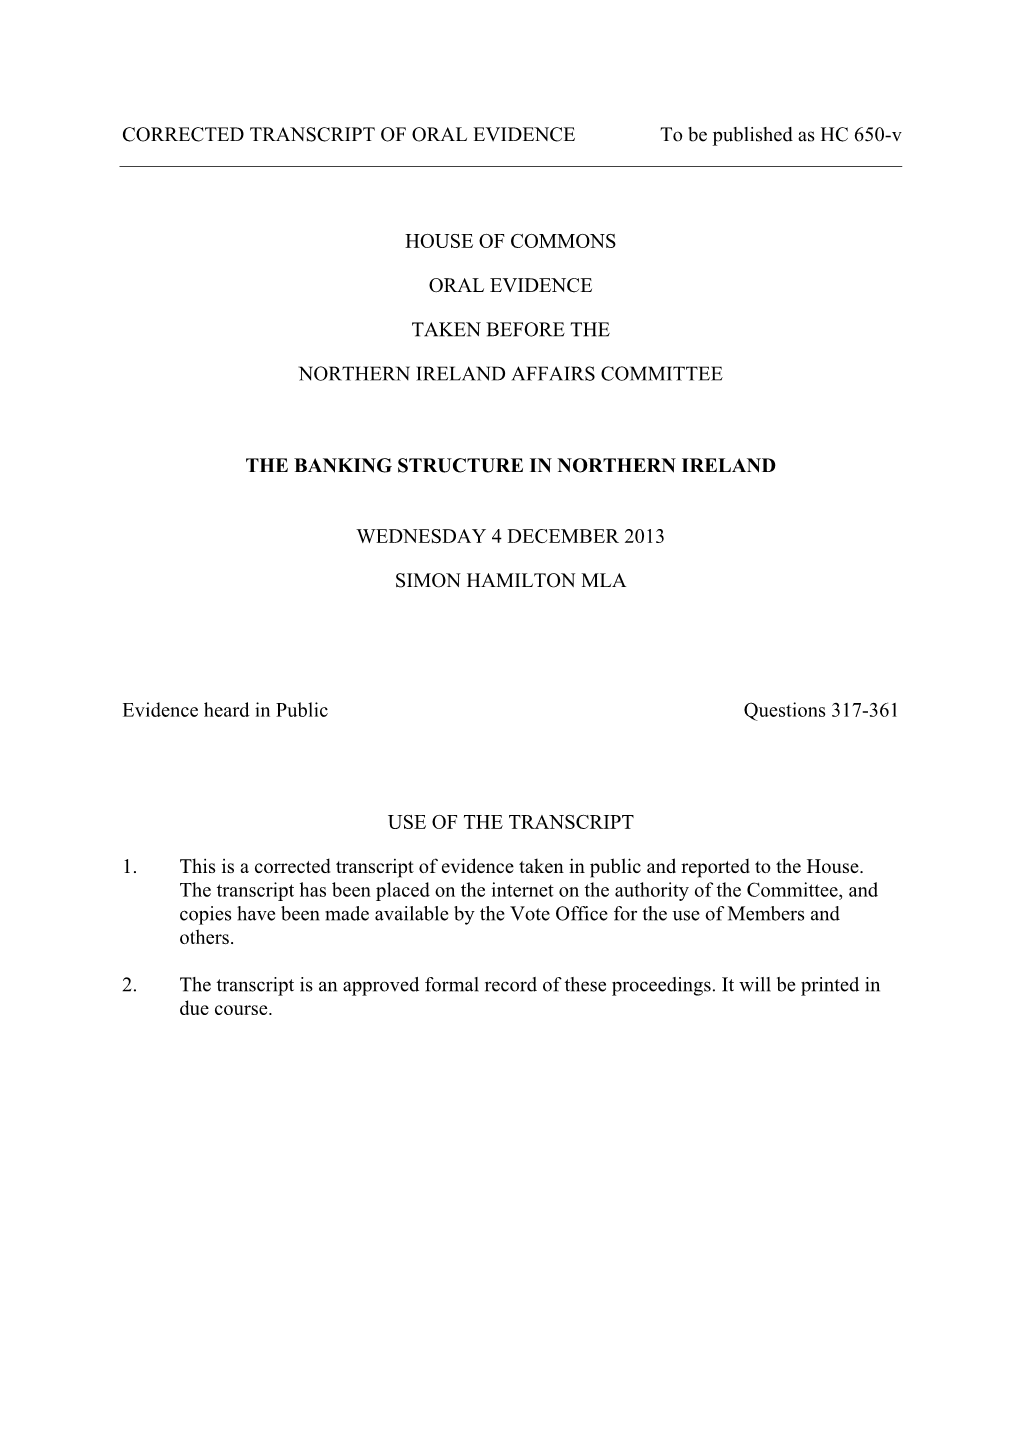 CORRECTED TRANSCRIPT of ORAL EVIDENCE to Be Published As HC 650-V HOUSE of COMMONS ORAL EVIDENCE TAKEN BEFORE the NORTHERN IRELA